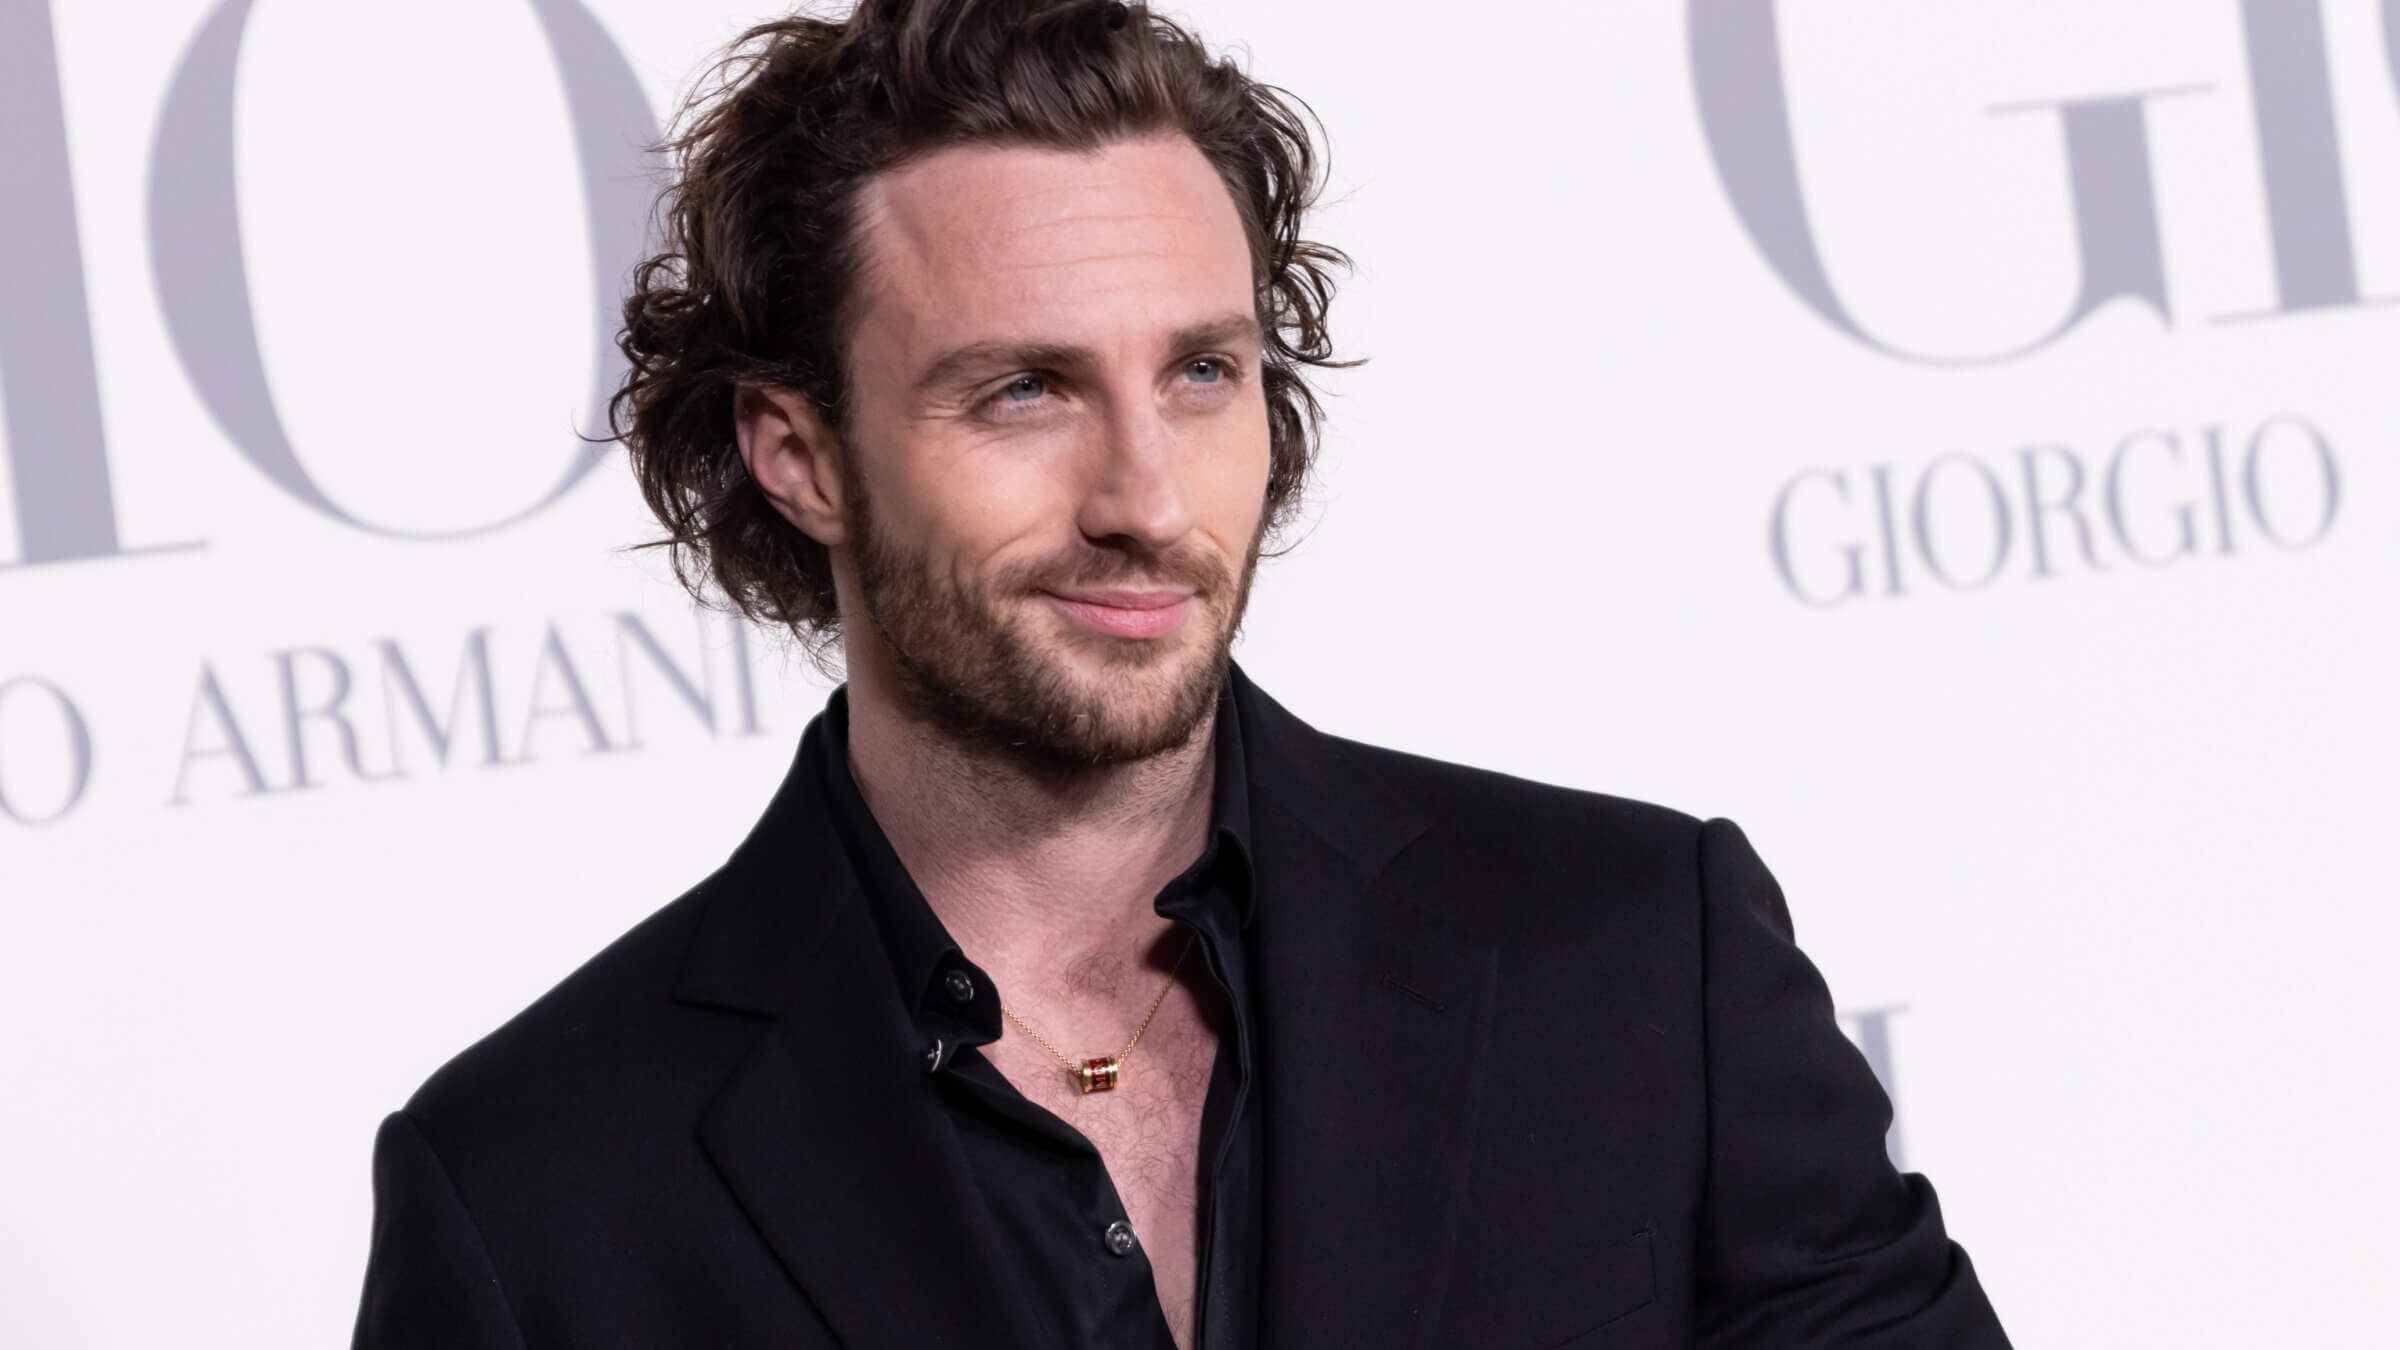 Aaron Taylor-Johnson was reportedly offered the role of James Bond.